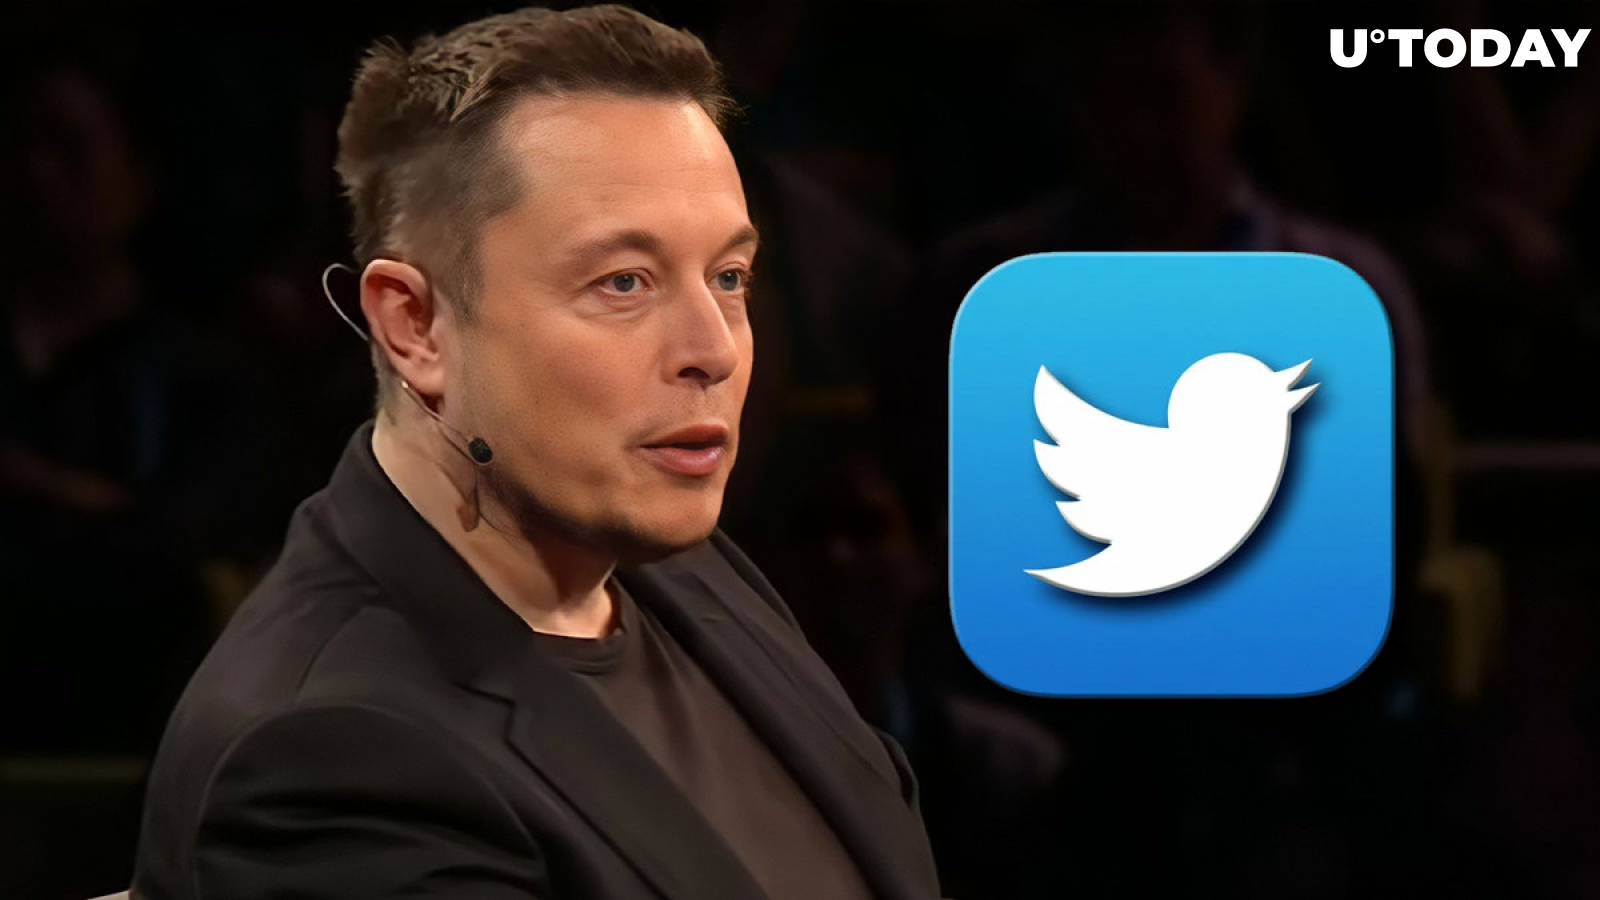 Elon Musk May Add Crypto Payments to Twitter After Purchasing: Influential Trading Group